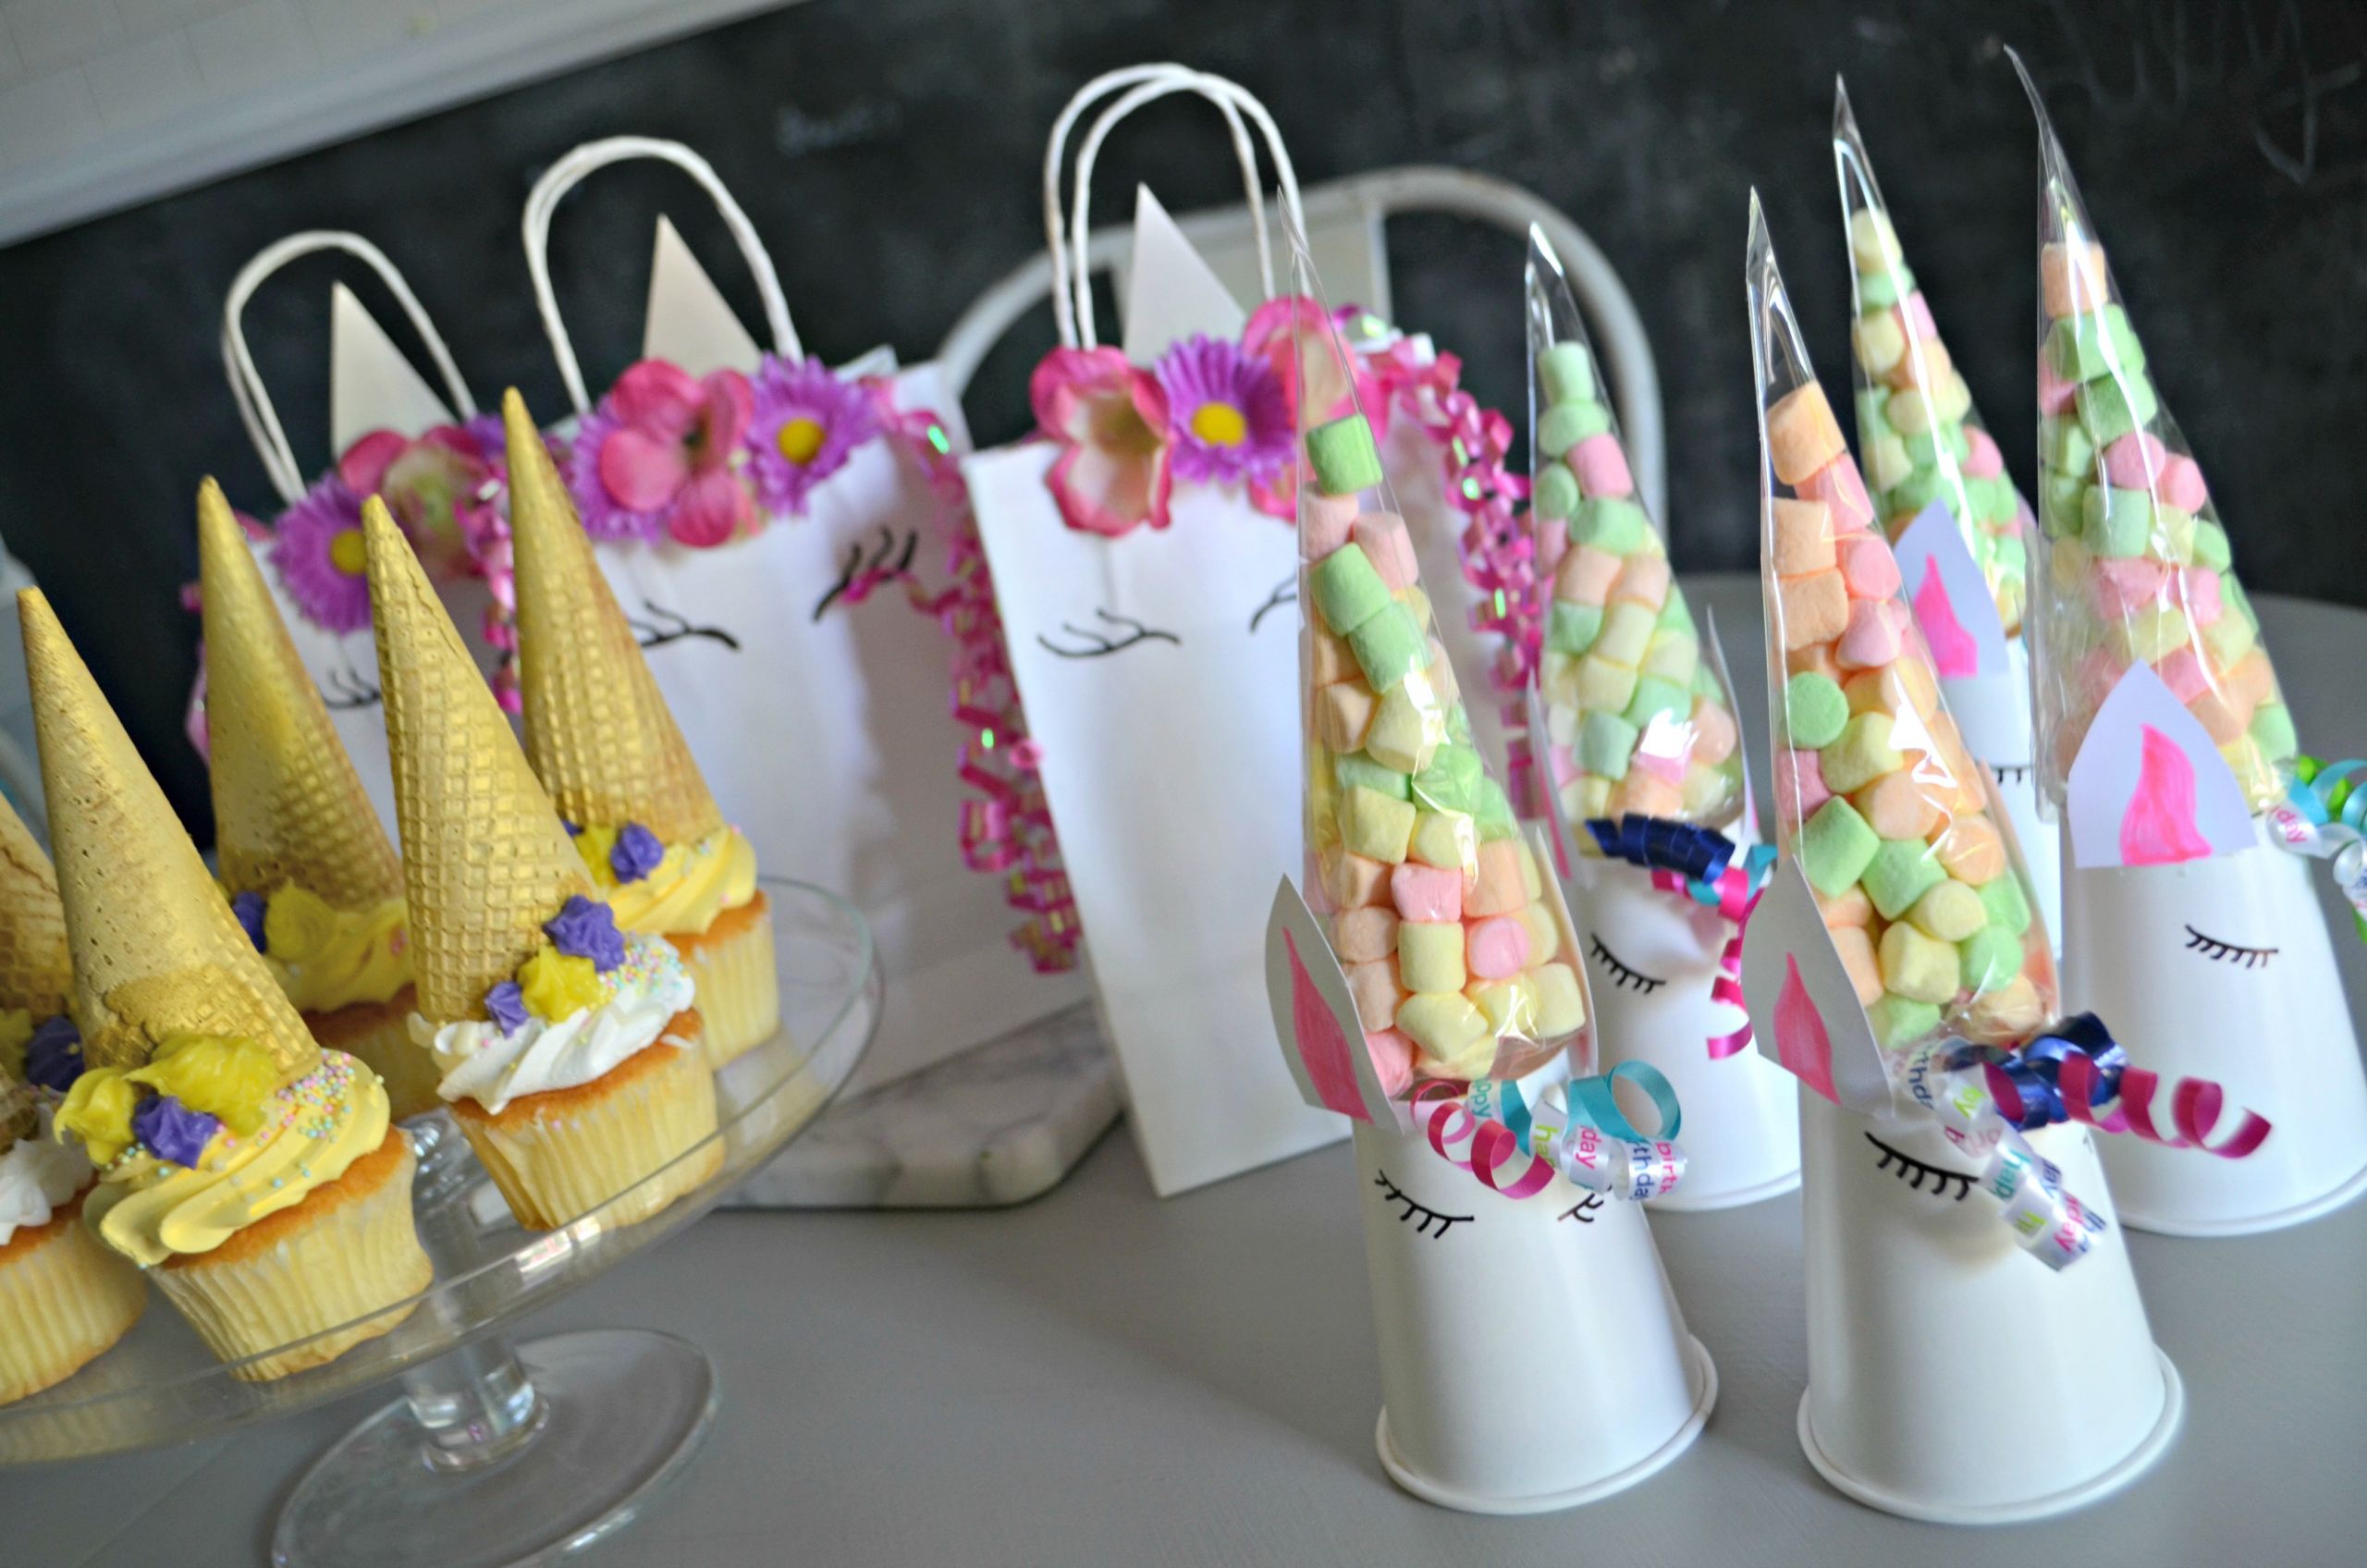 Food Ideas For Unicorn Party
 Make These 3 Frugal Cute and Easy DIY Unicorn Birthday